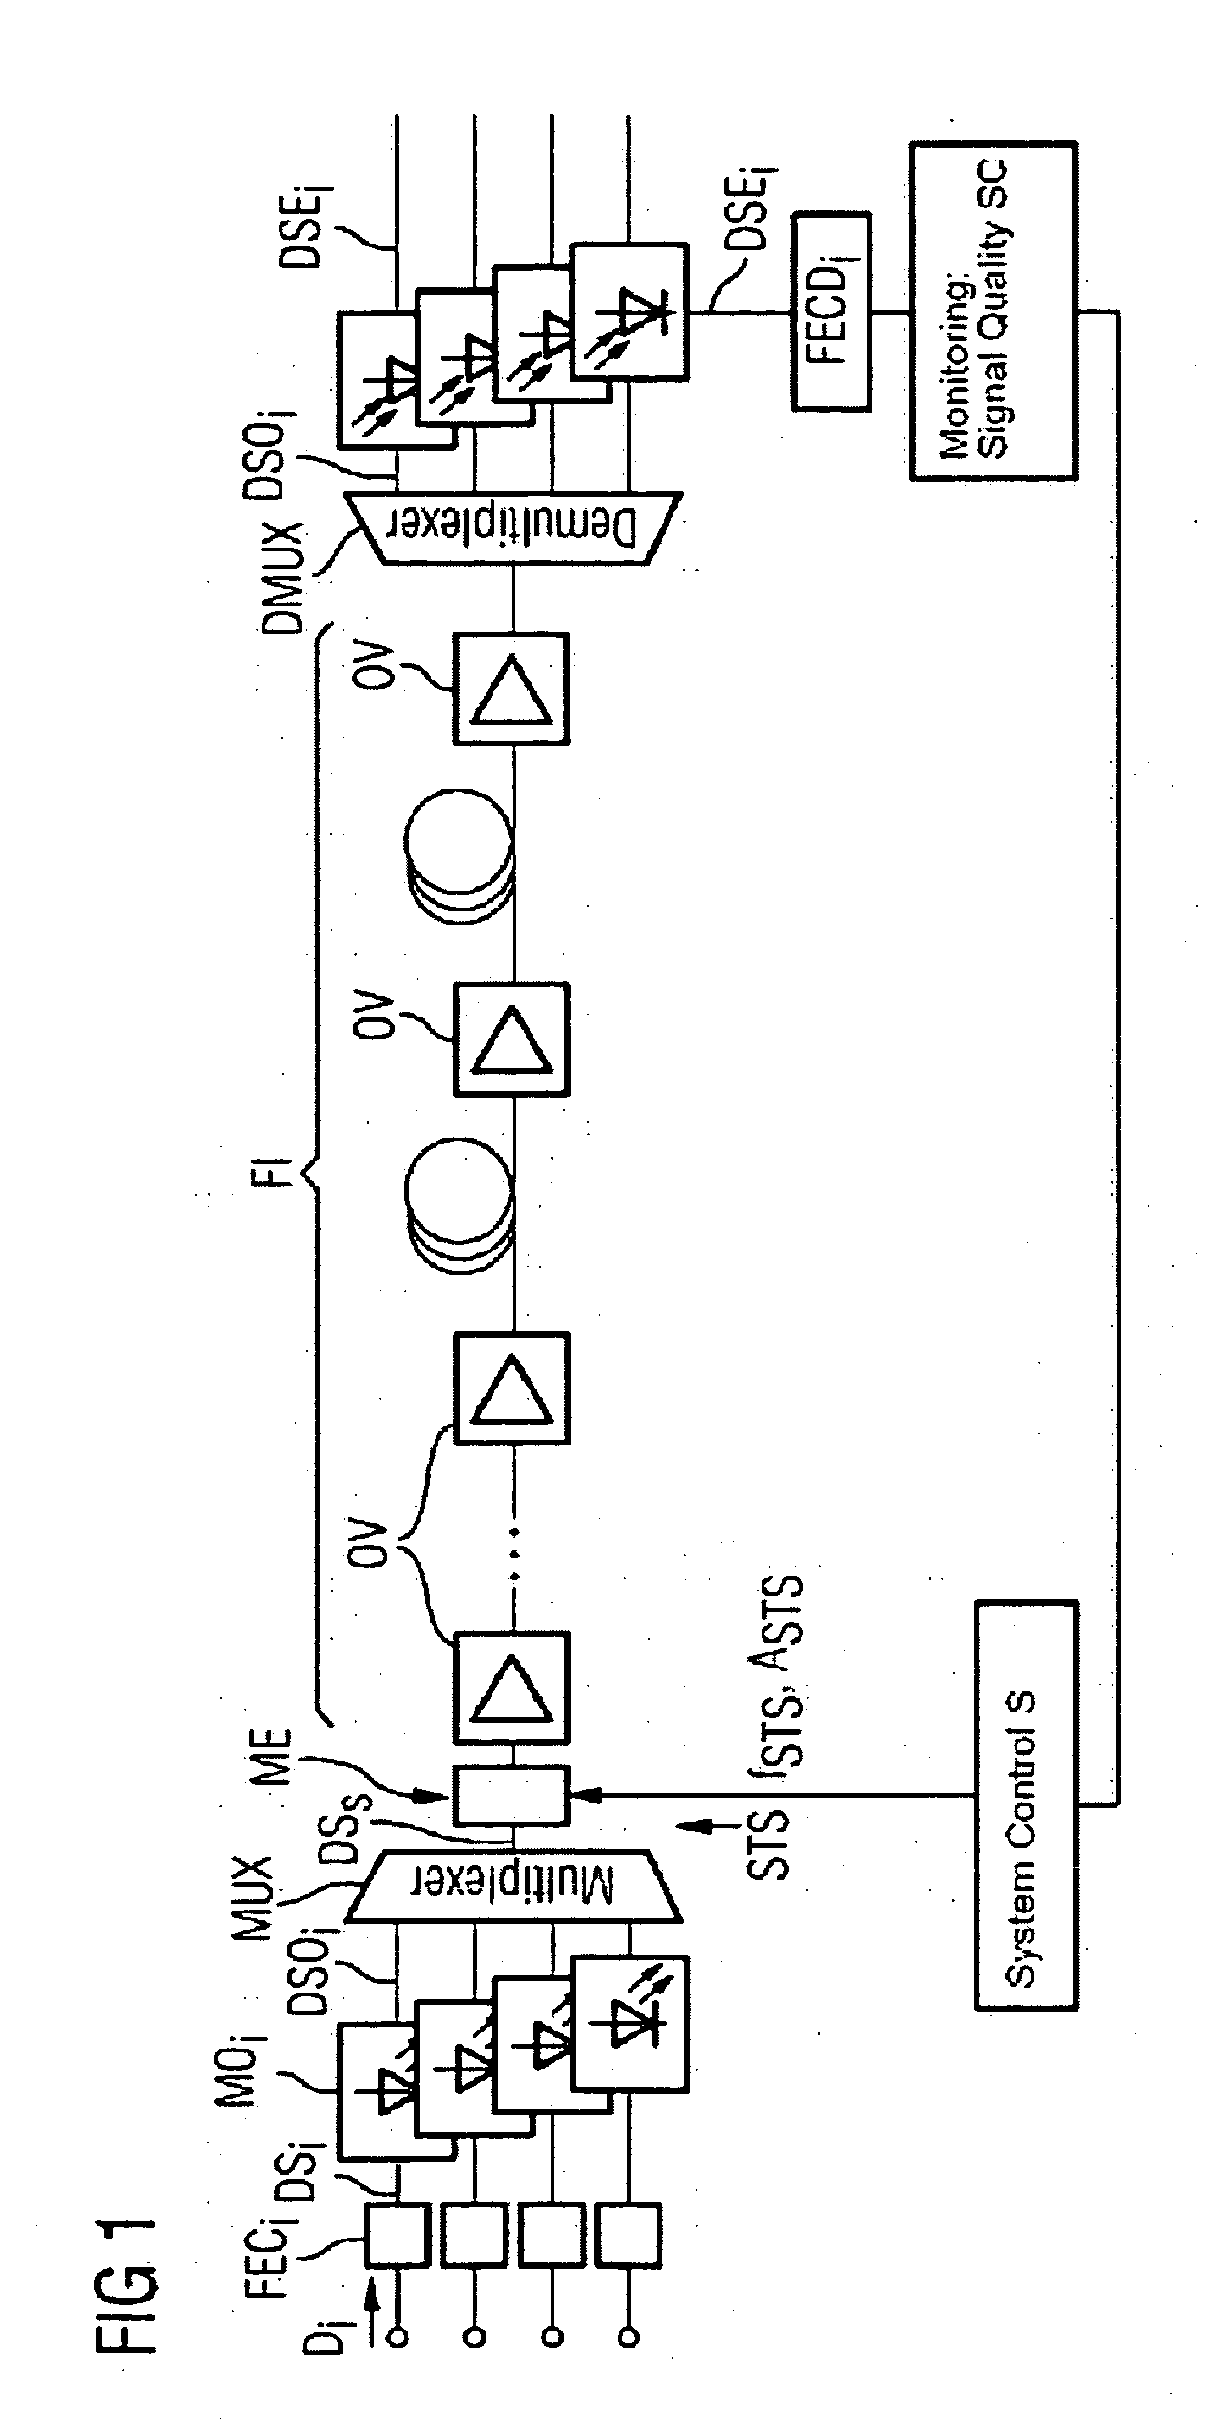 Method and arrangement for determining the dispersion of an optical transmission link